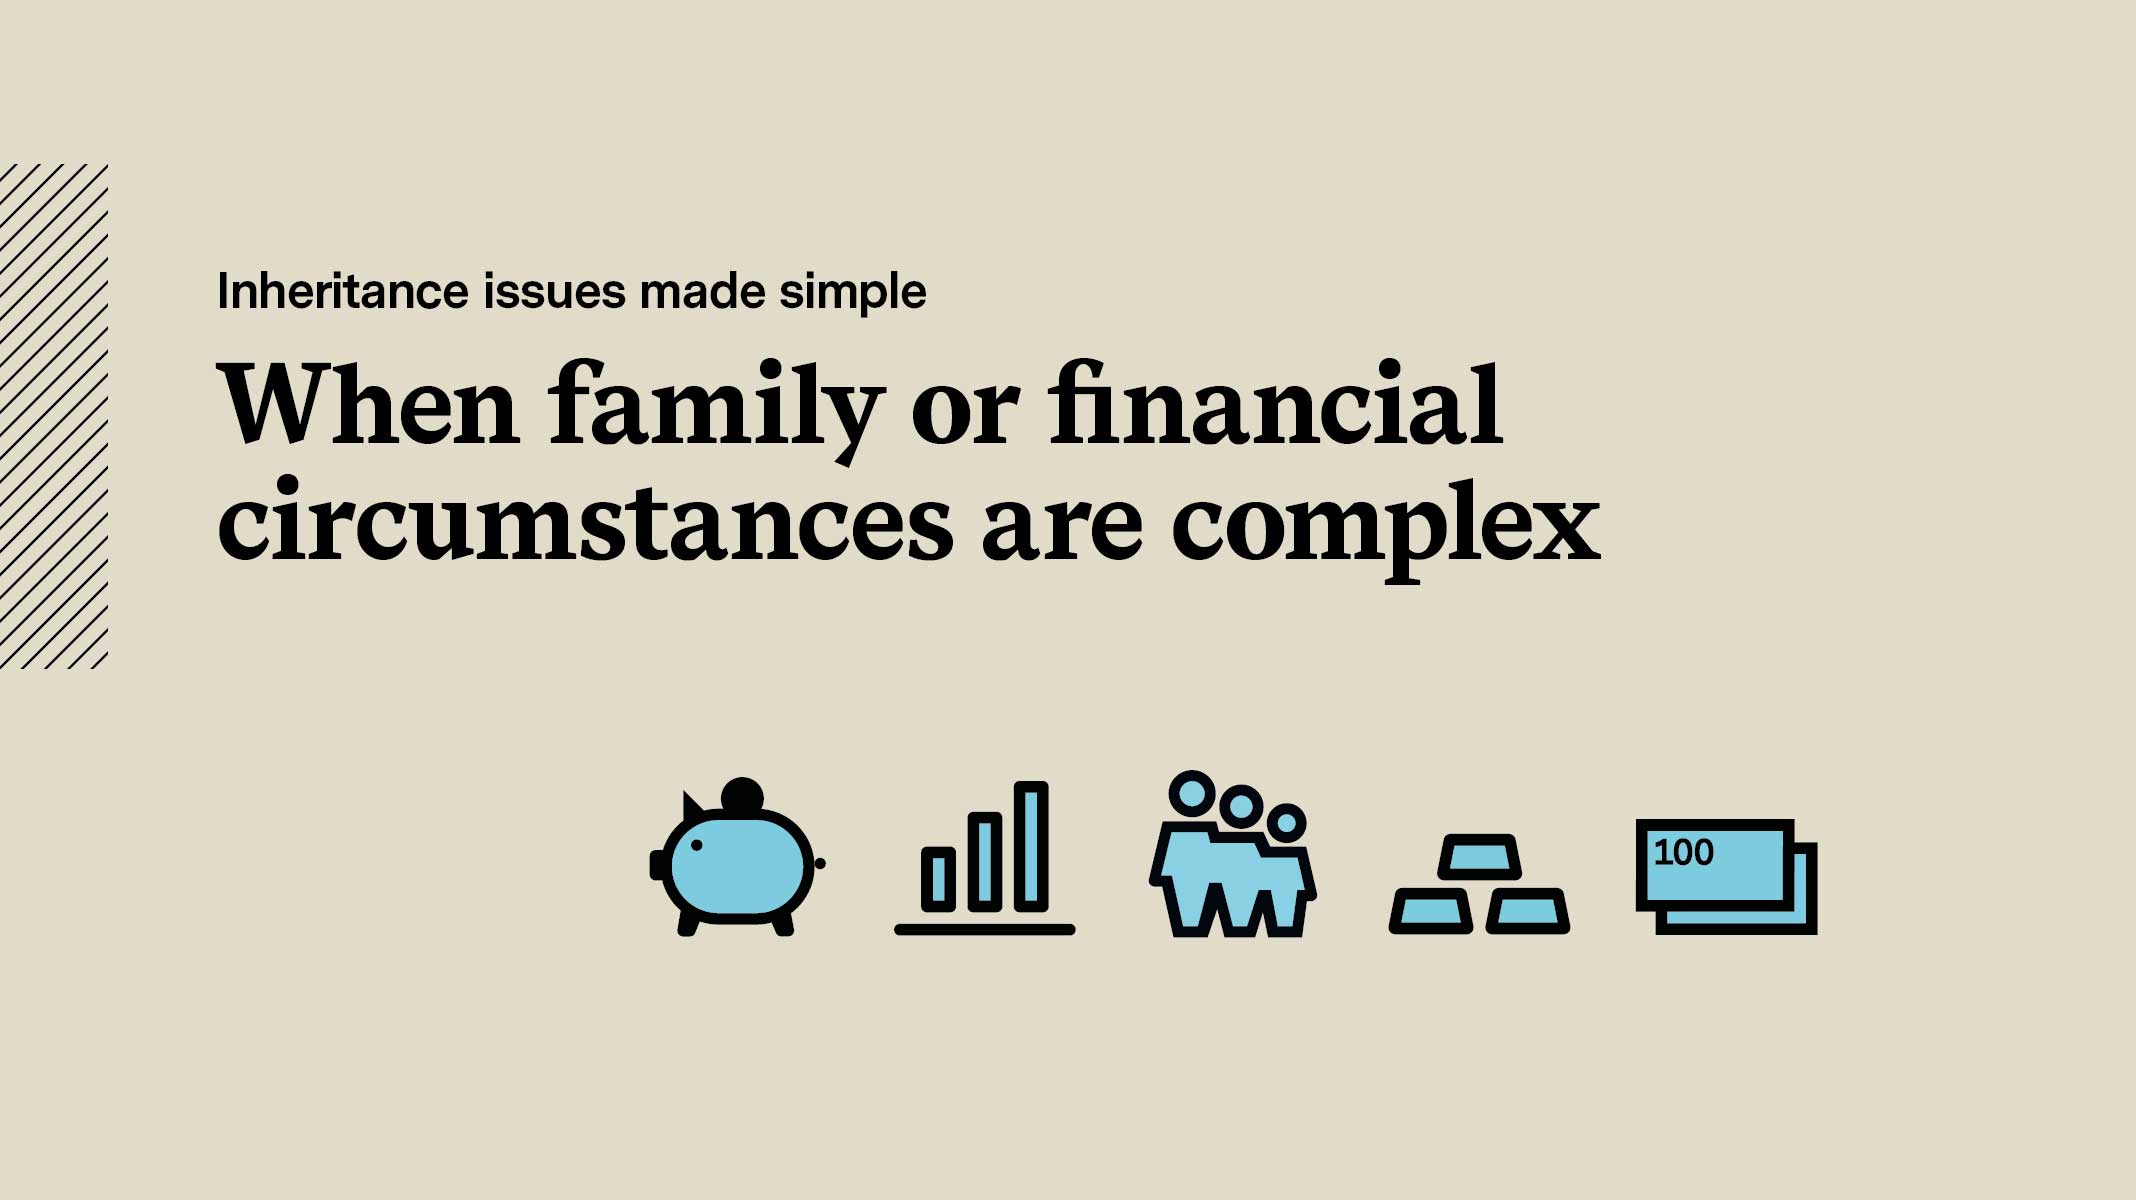 Slide 1: When family or financial circumstances are complex